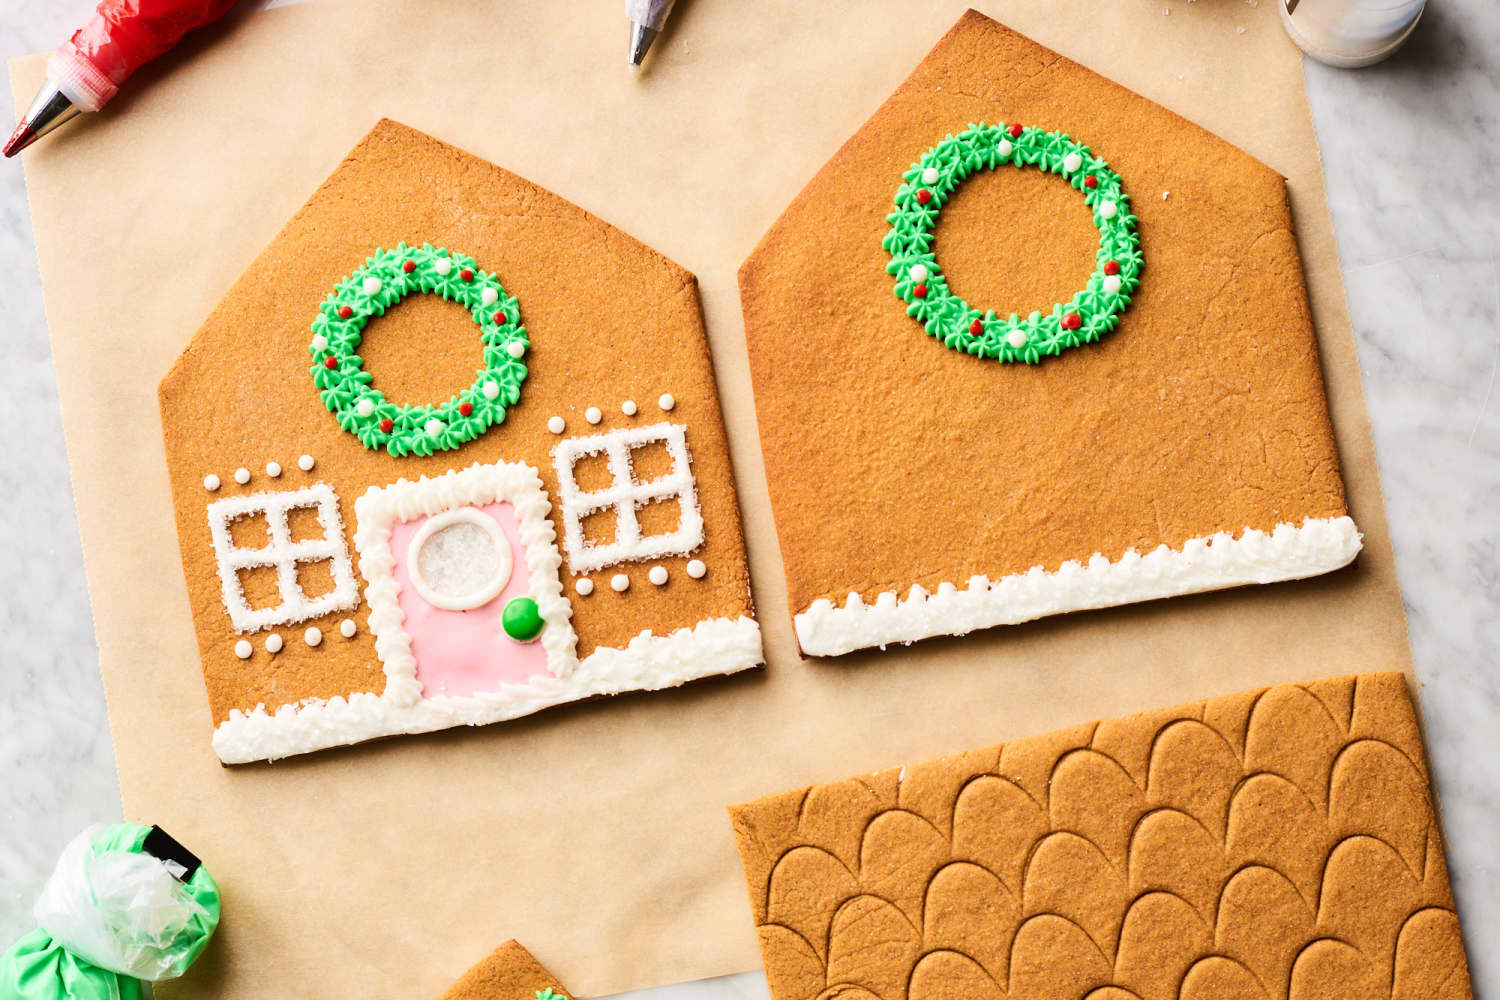 https://cdn.apartmenttherapy.info/image/upload/f_auto,q_auto:eco,c_fill,g_auto,w_1500,ar_3:2/k%2FPhoto%2FRecipes%2F2019-12-HT-Easiest-Gingerbread-House%2FHT-Easiest-Gingerbread-House_068